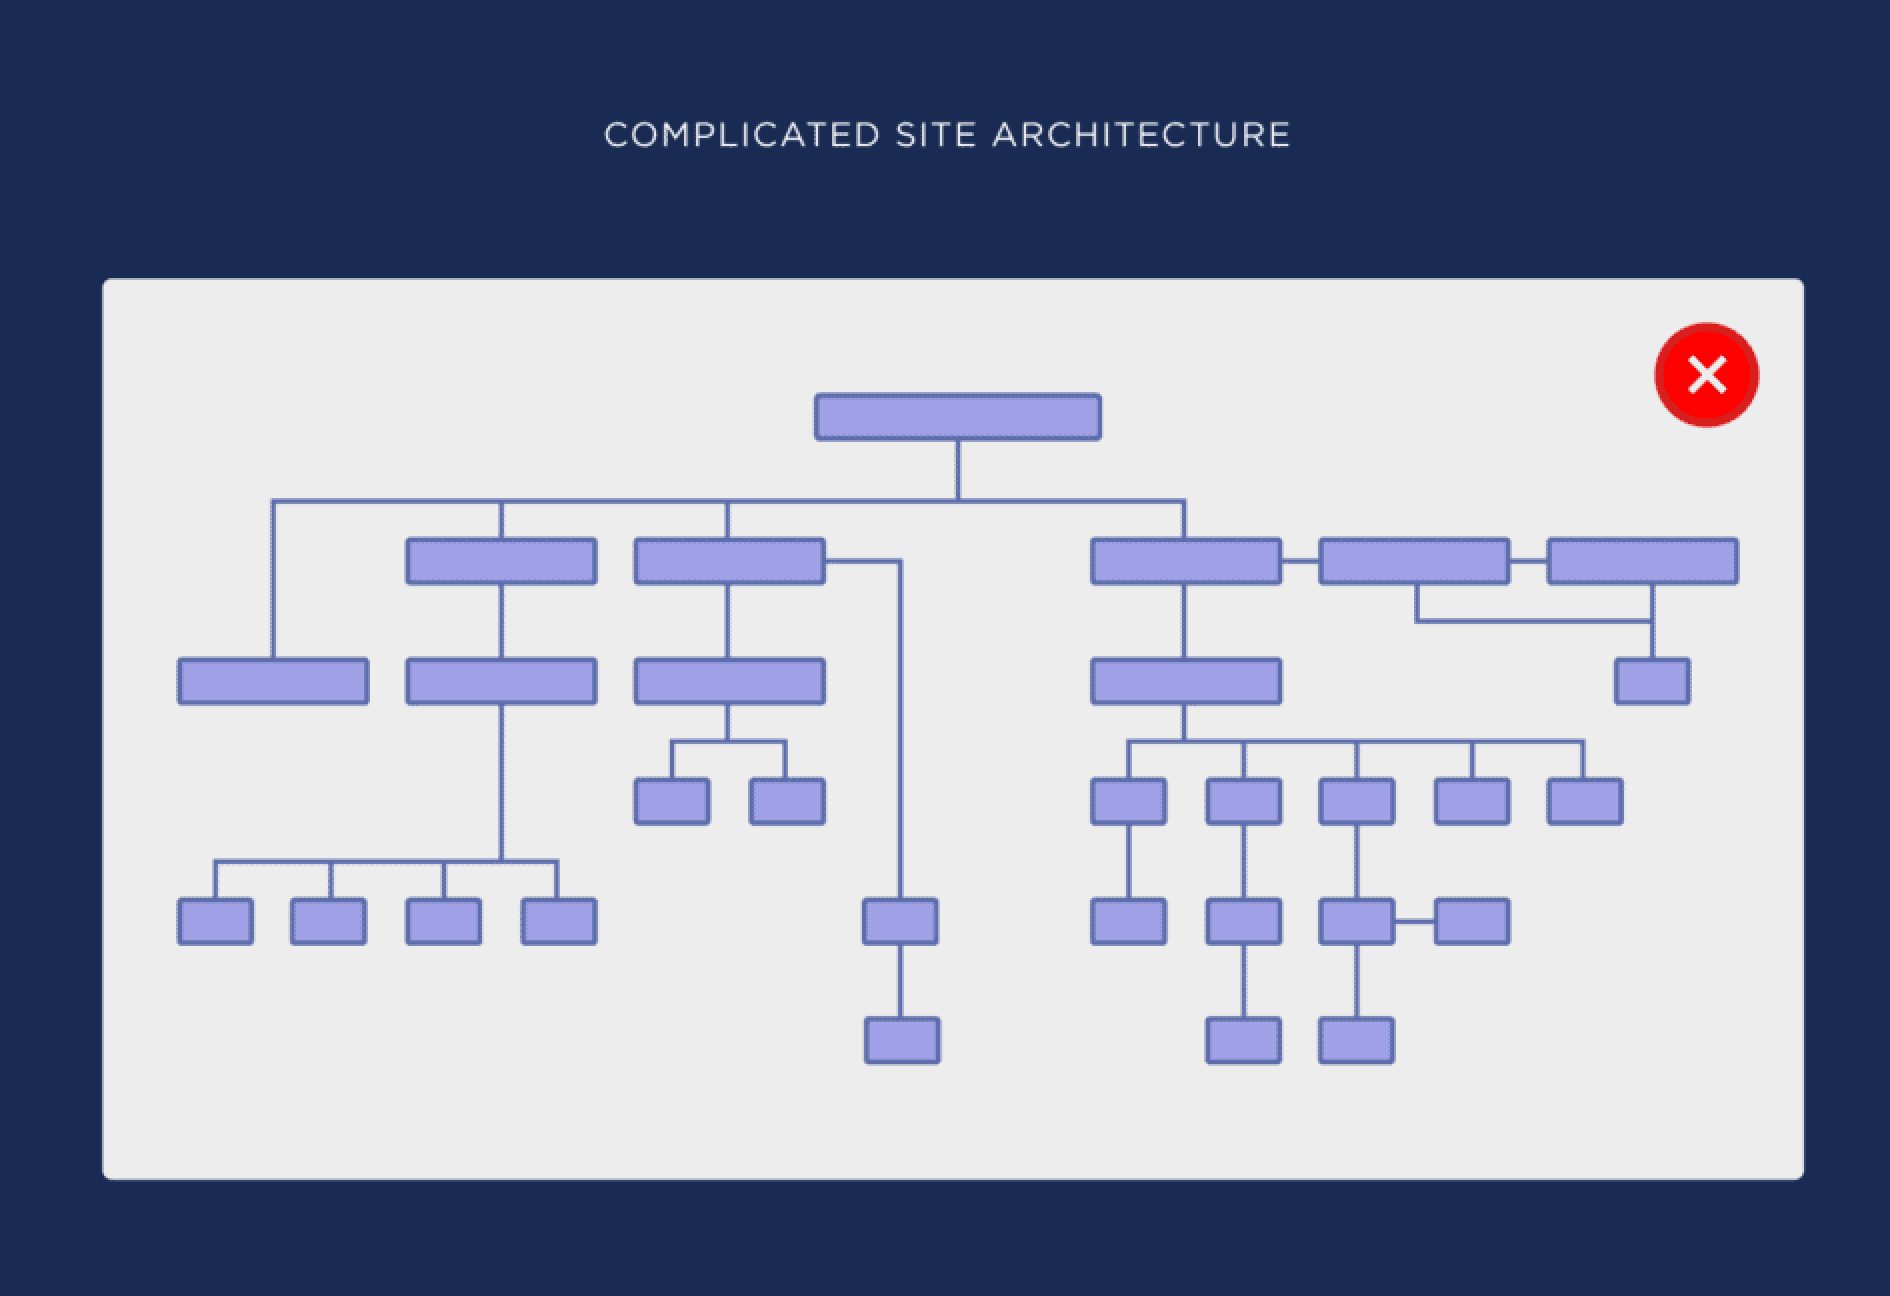 Infographic of complicated site architecture